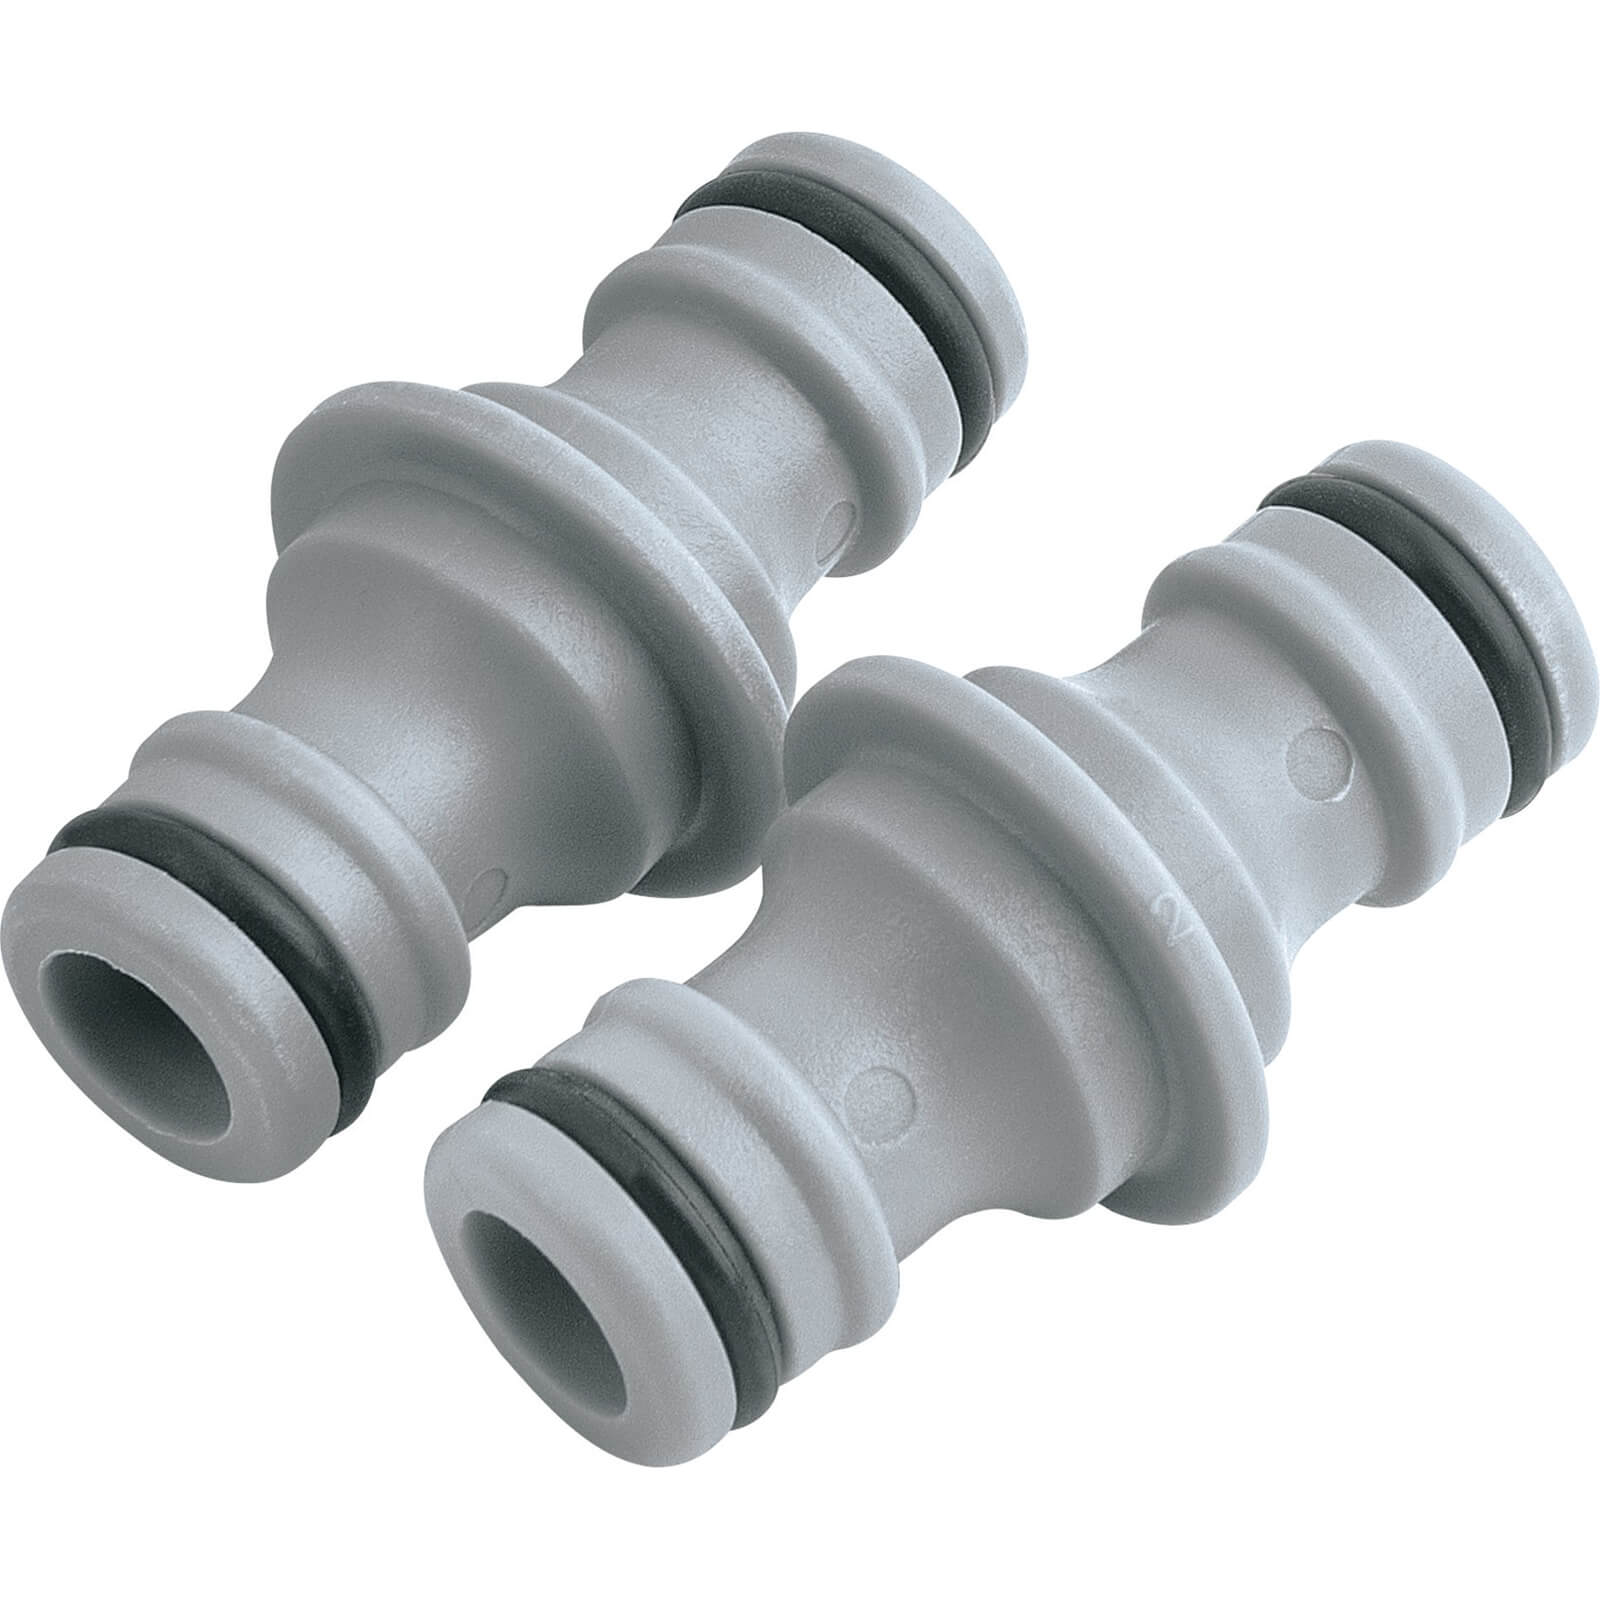 Photo of Draper 2 Piece Two Way Hose Connector Set